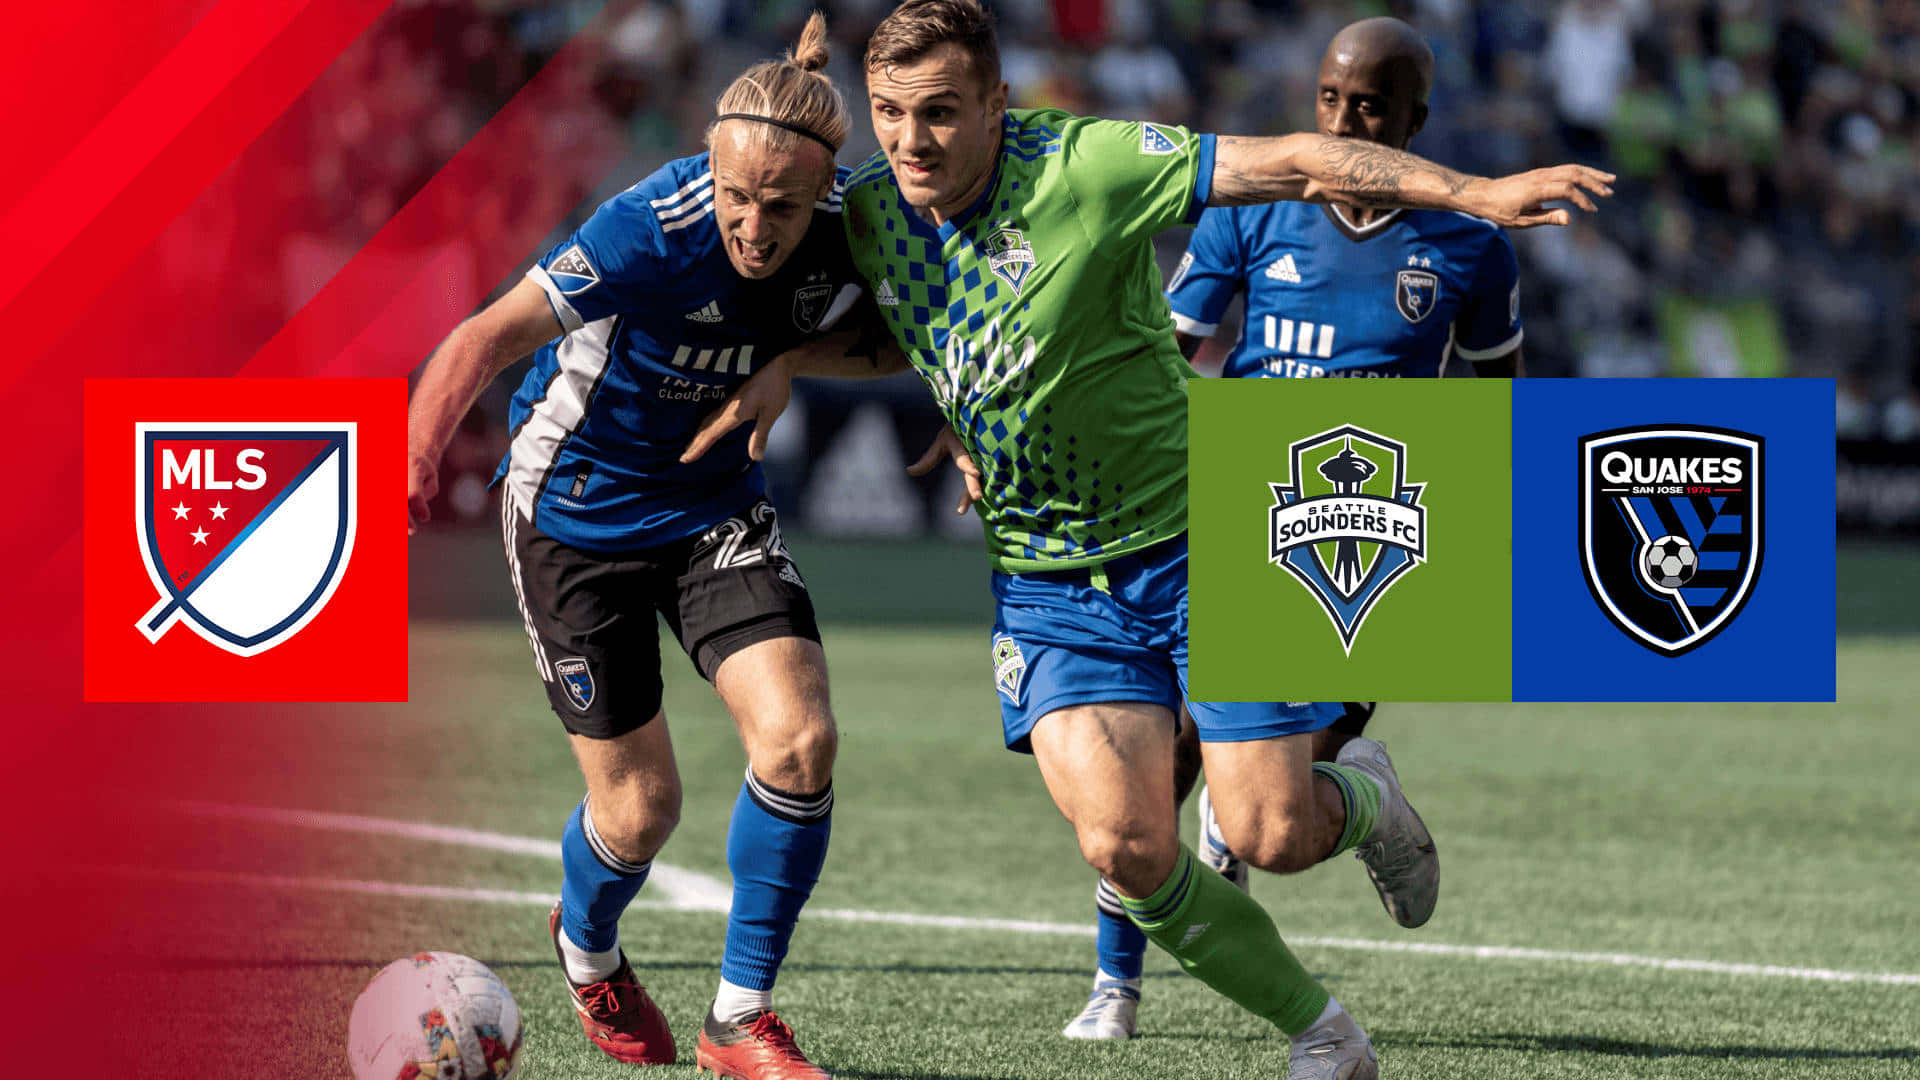 Seattle Sounders FC Playing Against Quakes Wallpaper